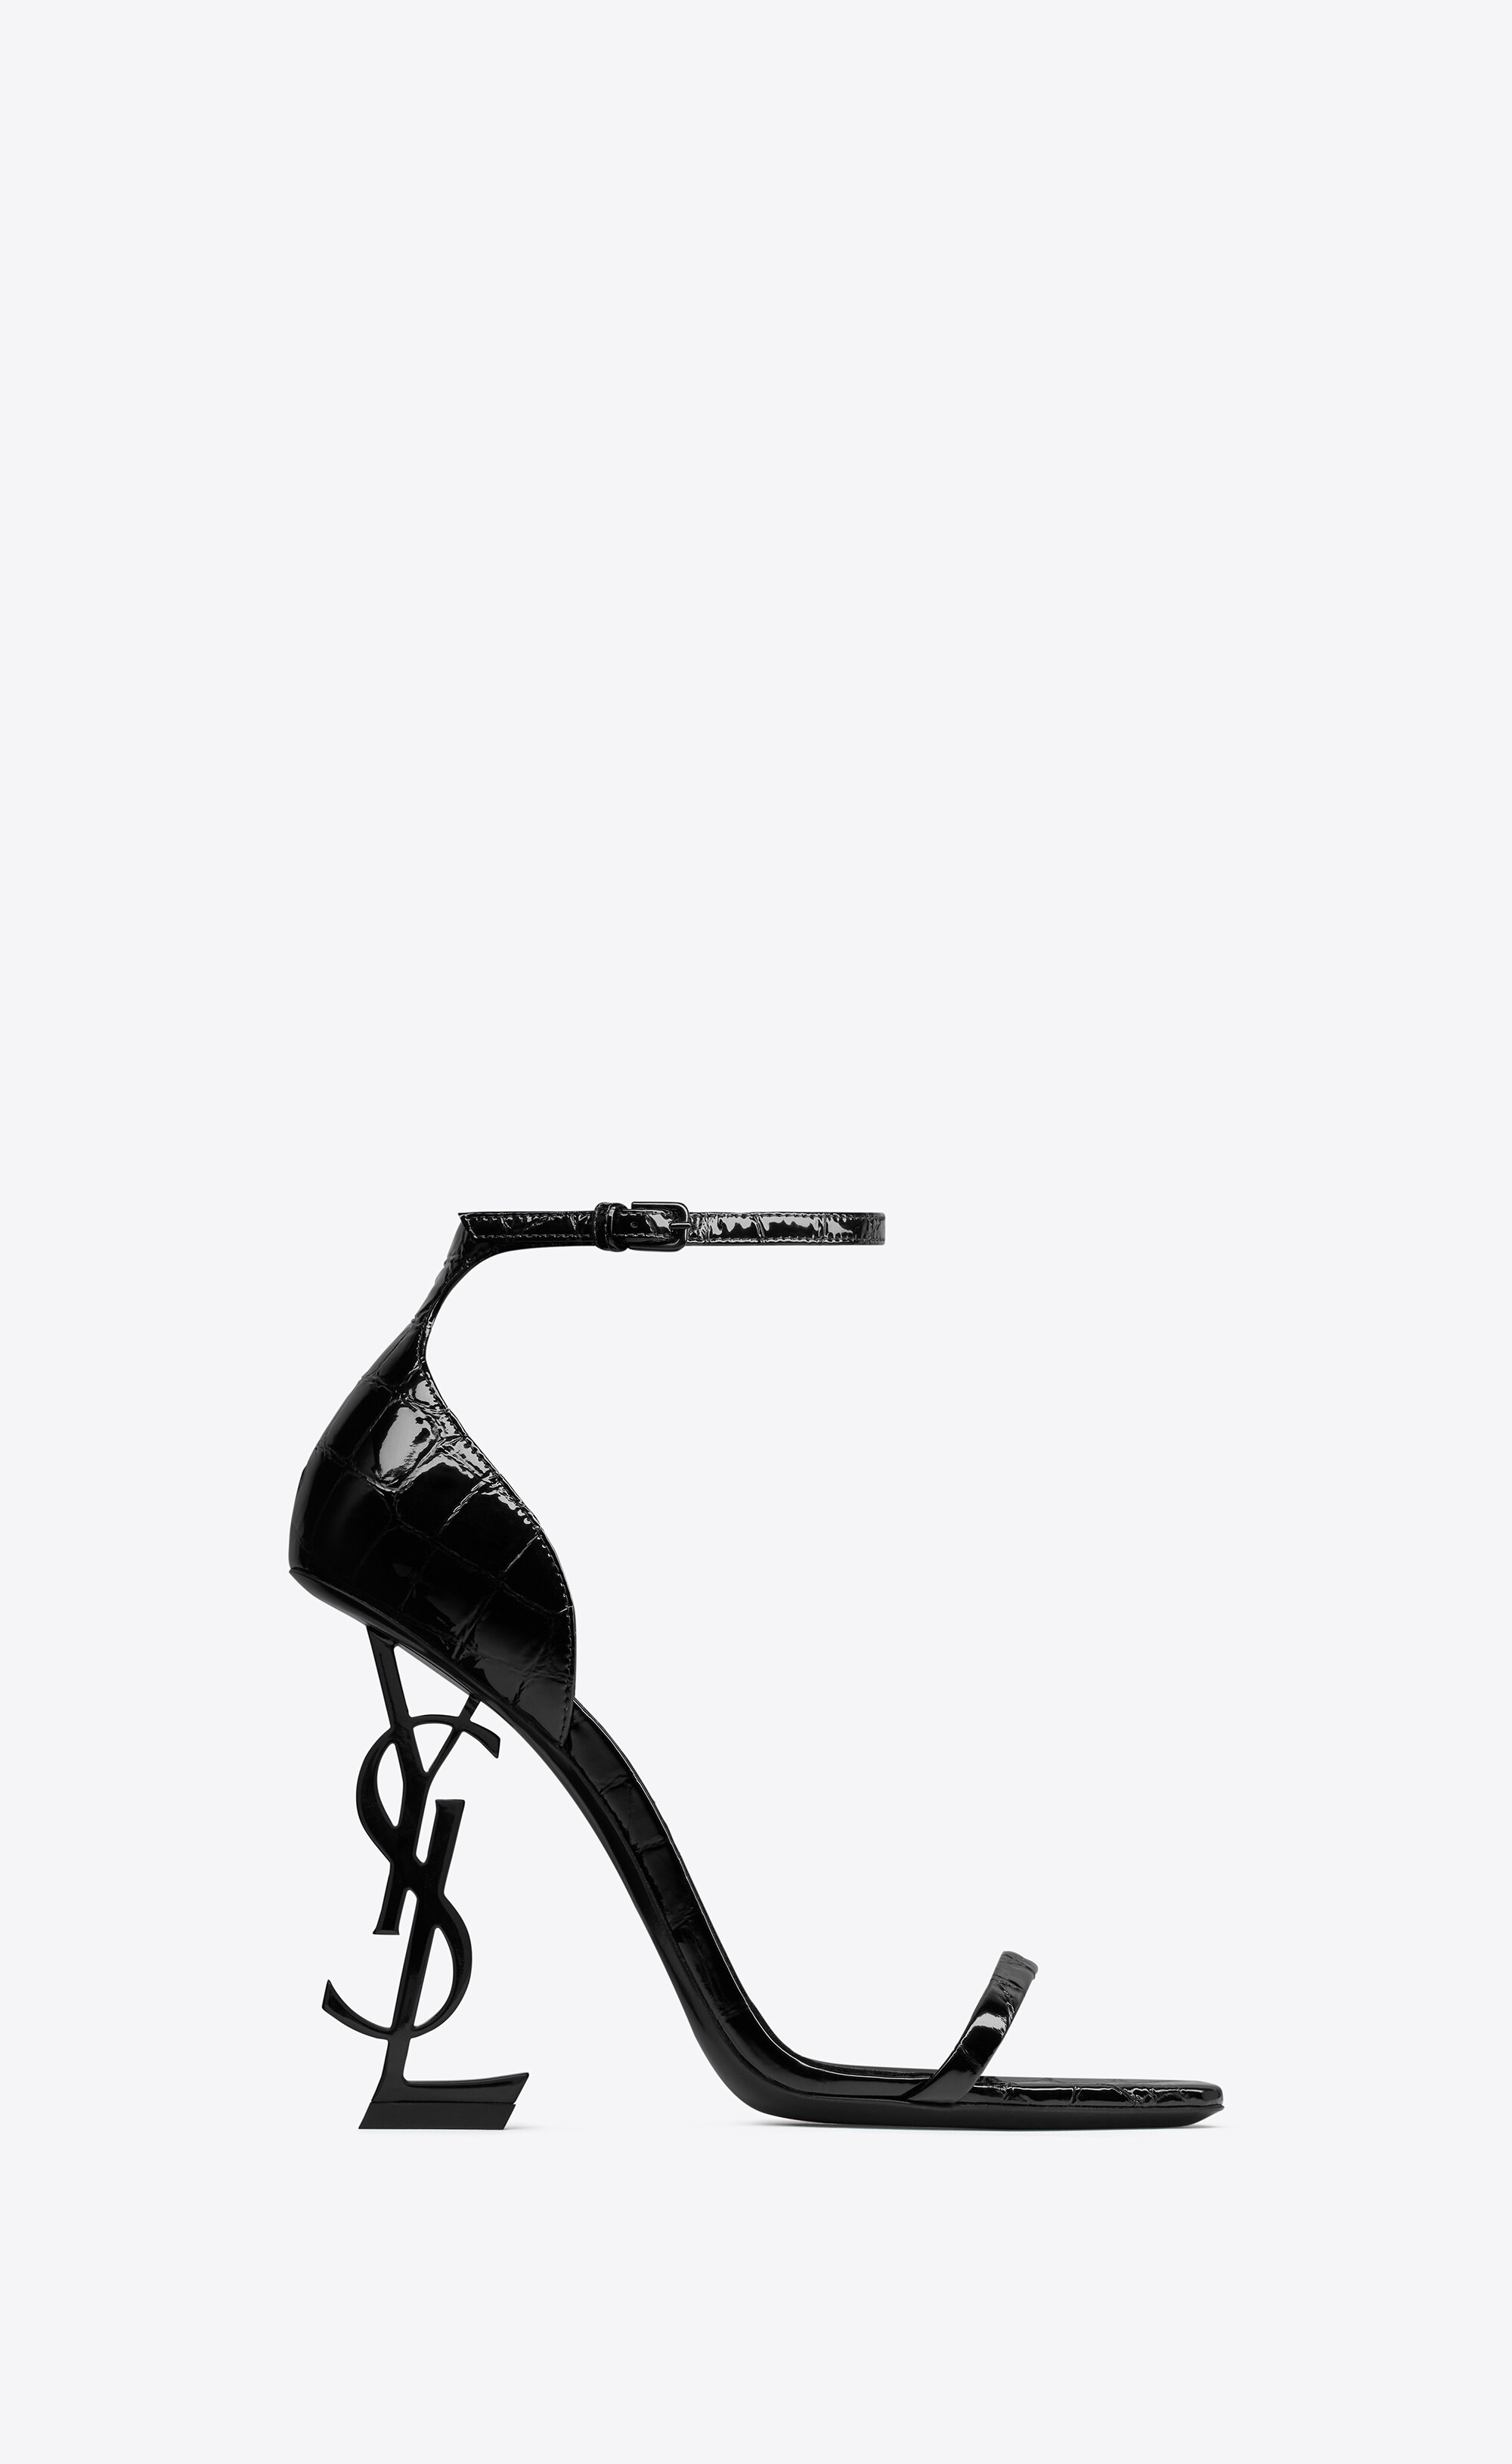 Women's Saint Laurent Shoes Outlet | YSL Sale Up To 70% Off At THE OUTNET